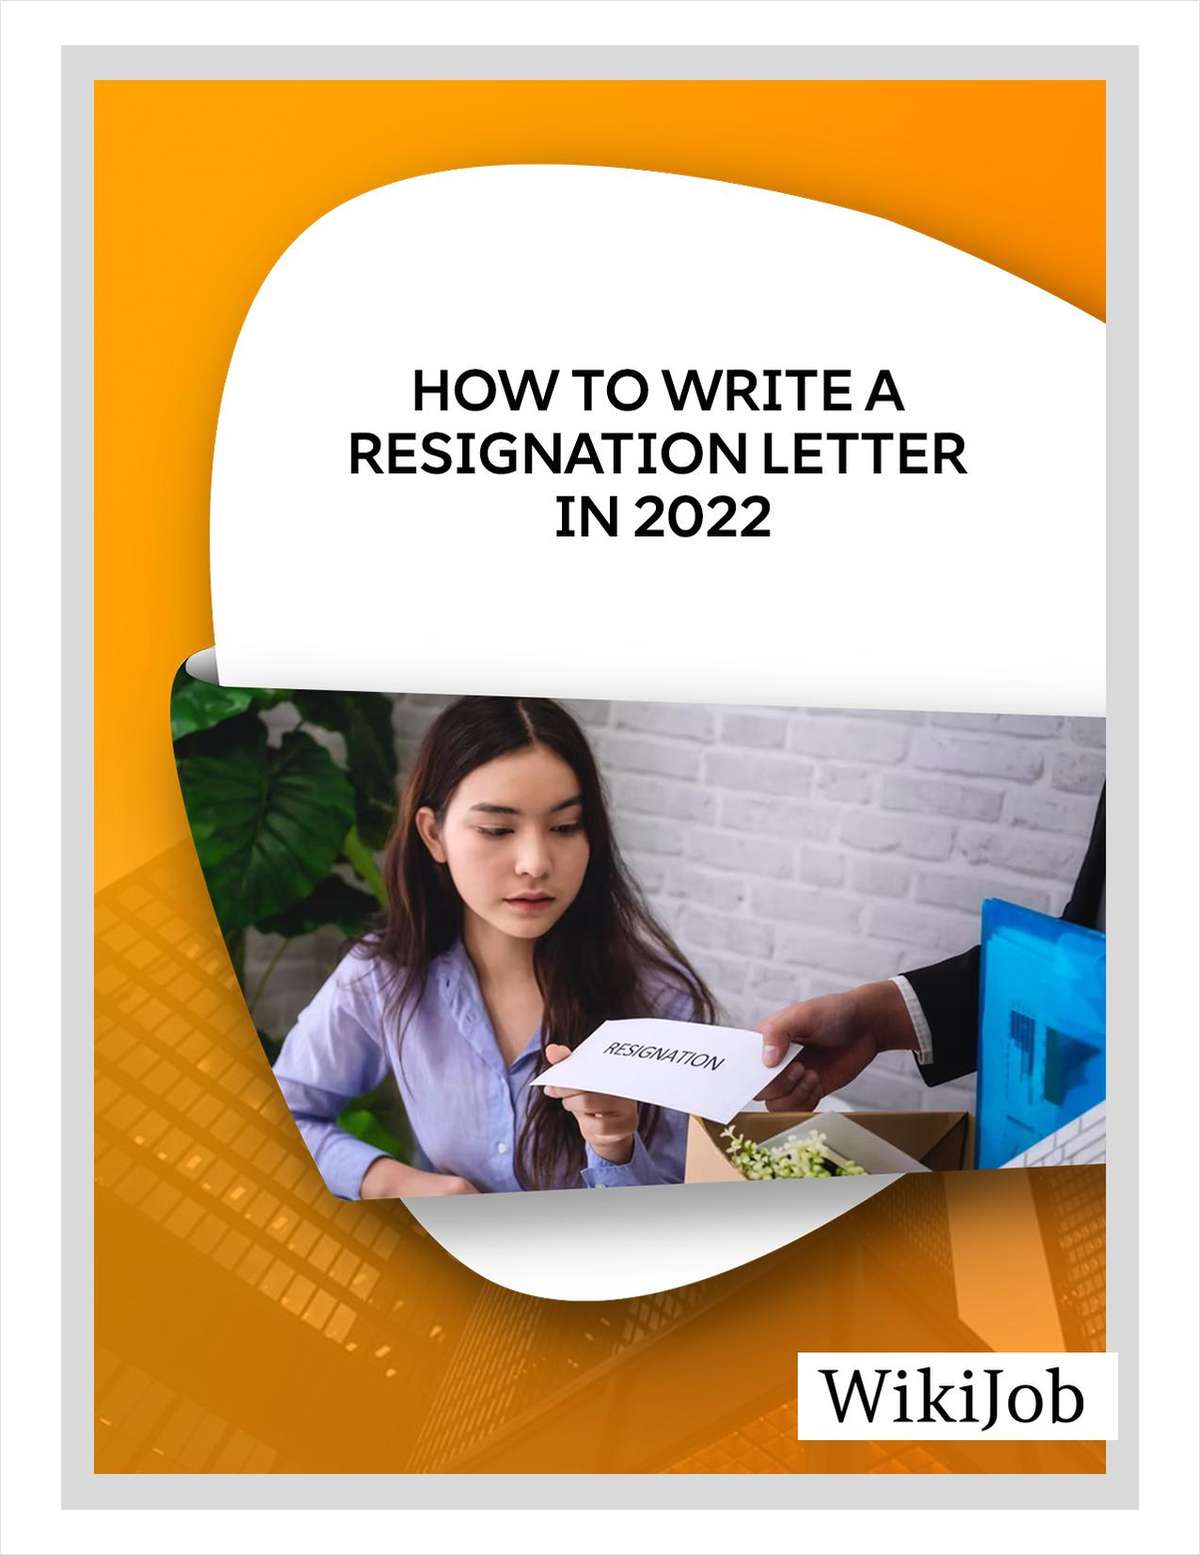 How to Write a Resignation Letter in 2022